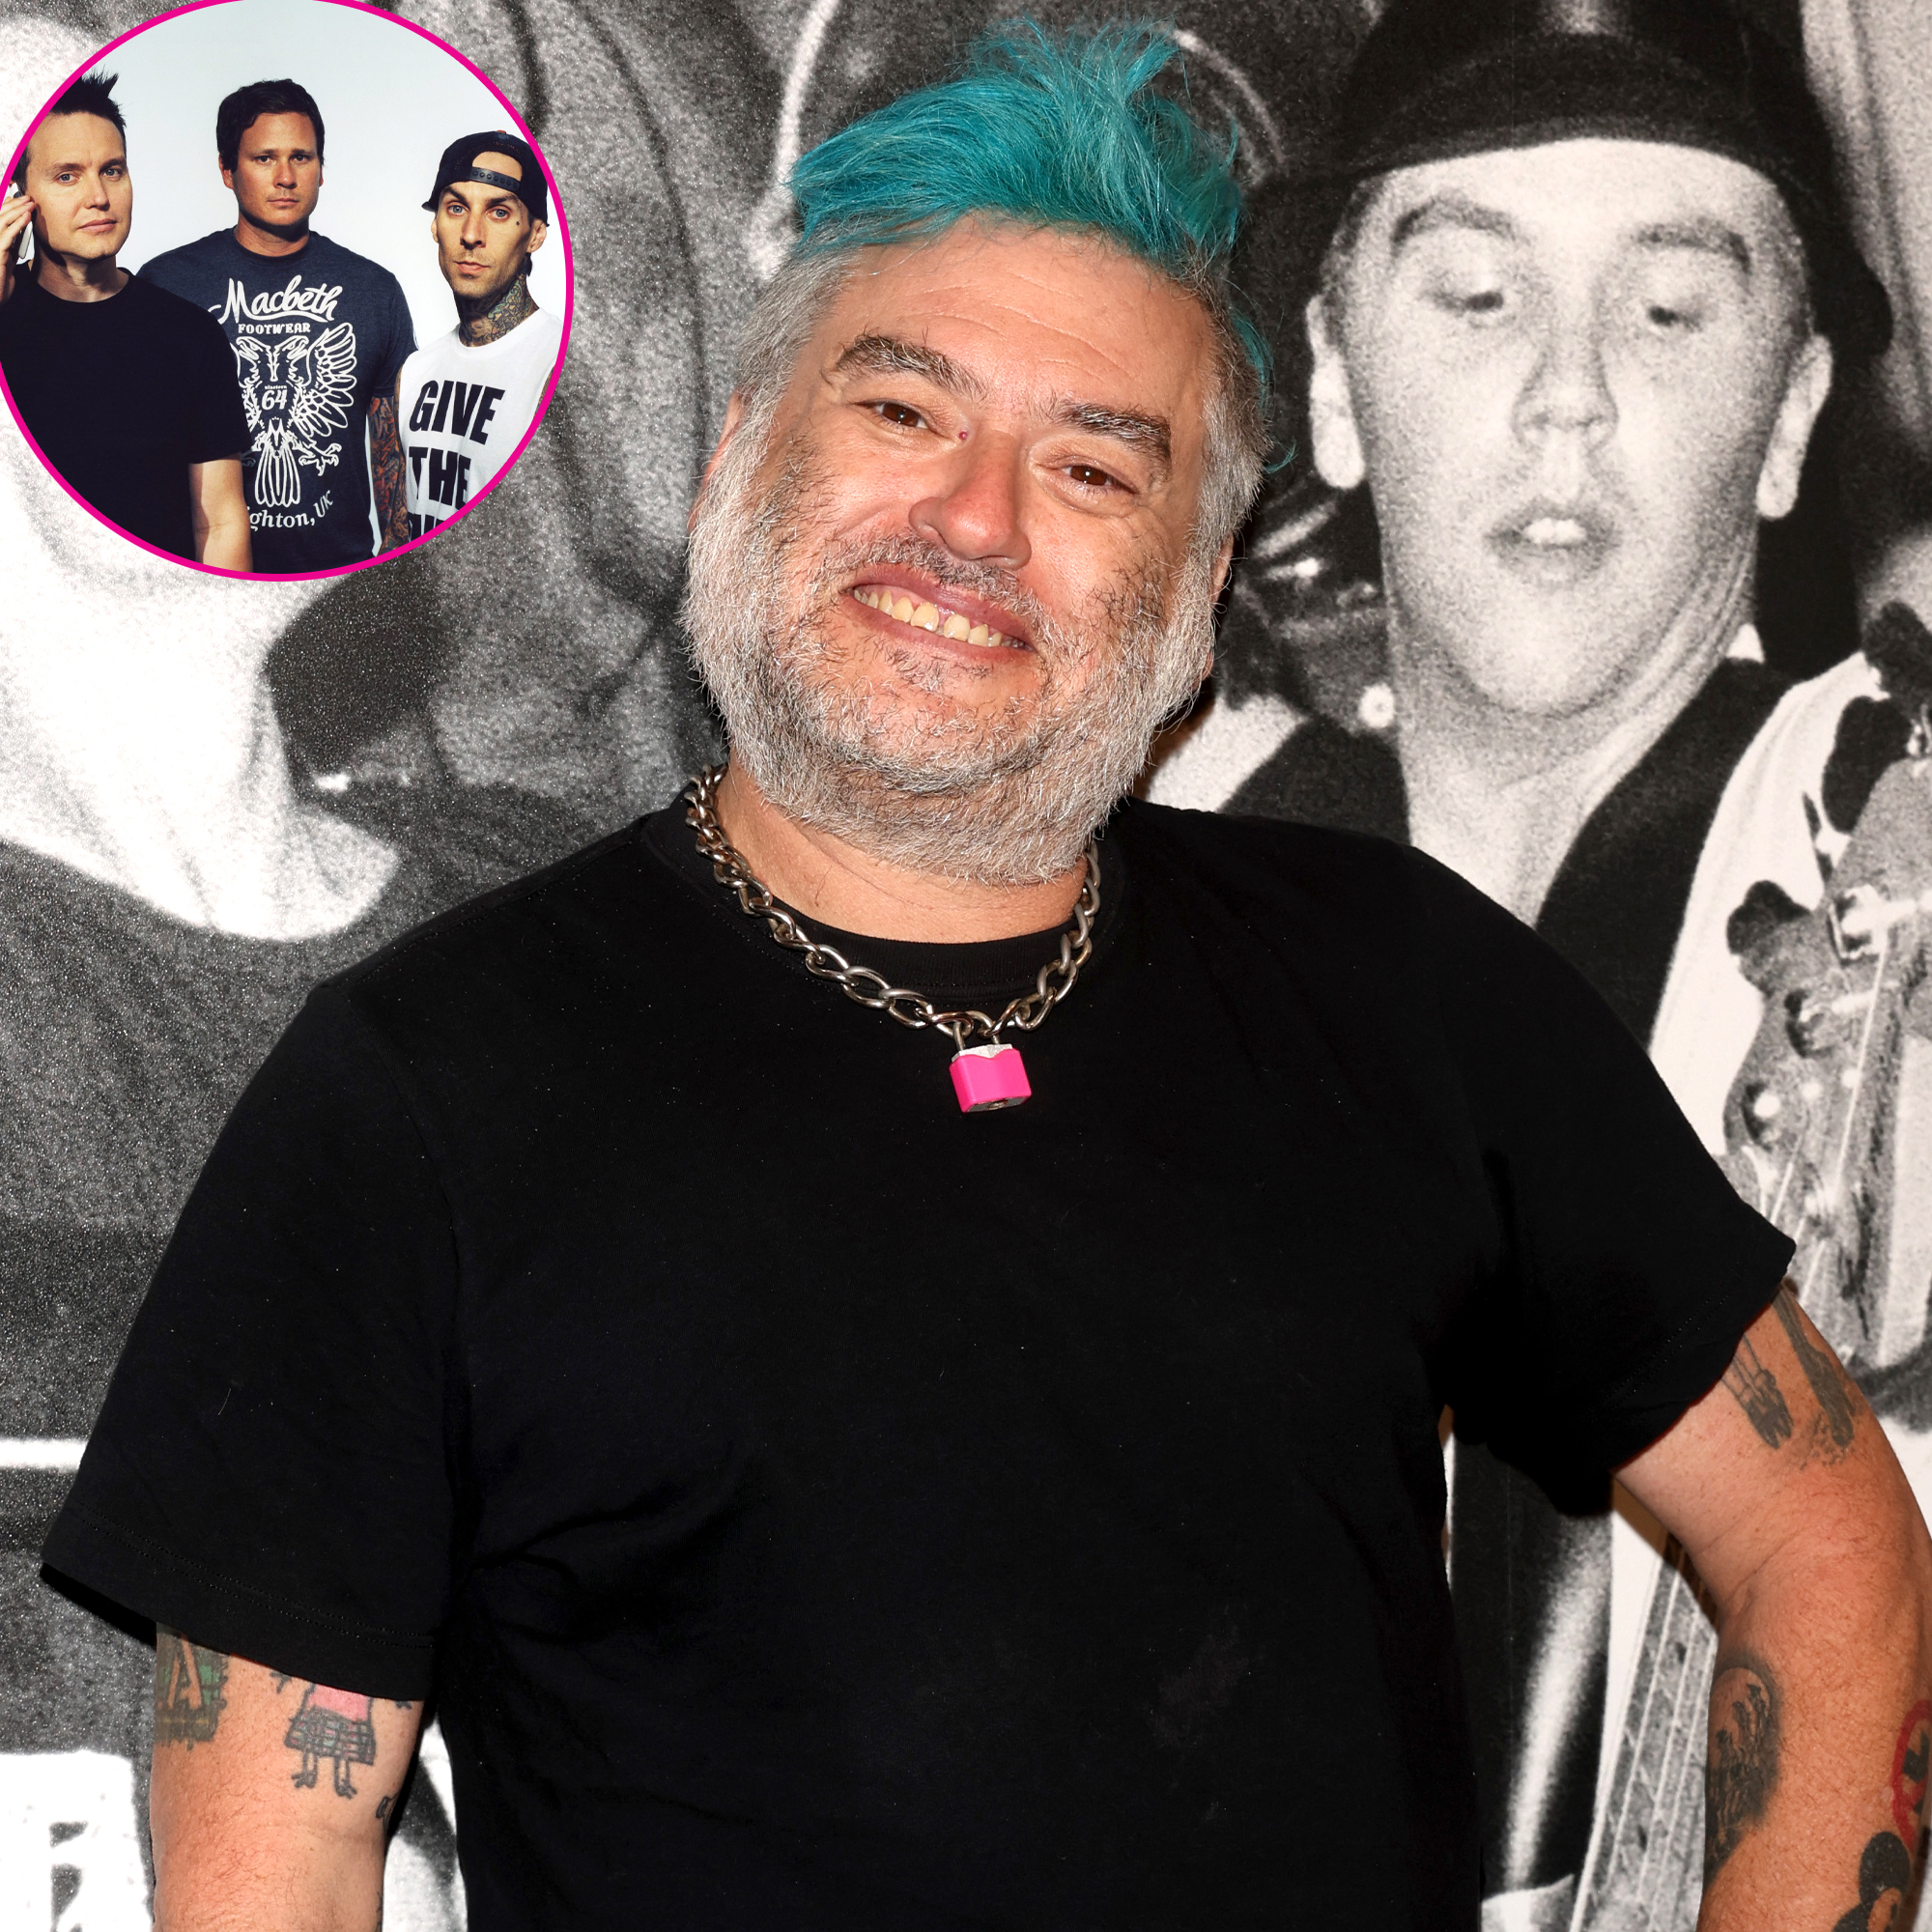 NOFX's Fat Mike on Final Tour, Clearing the Air With Blink-182 